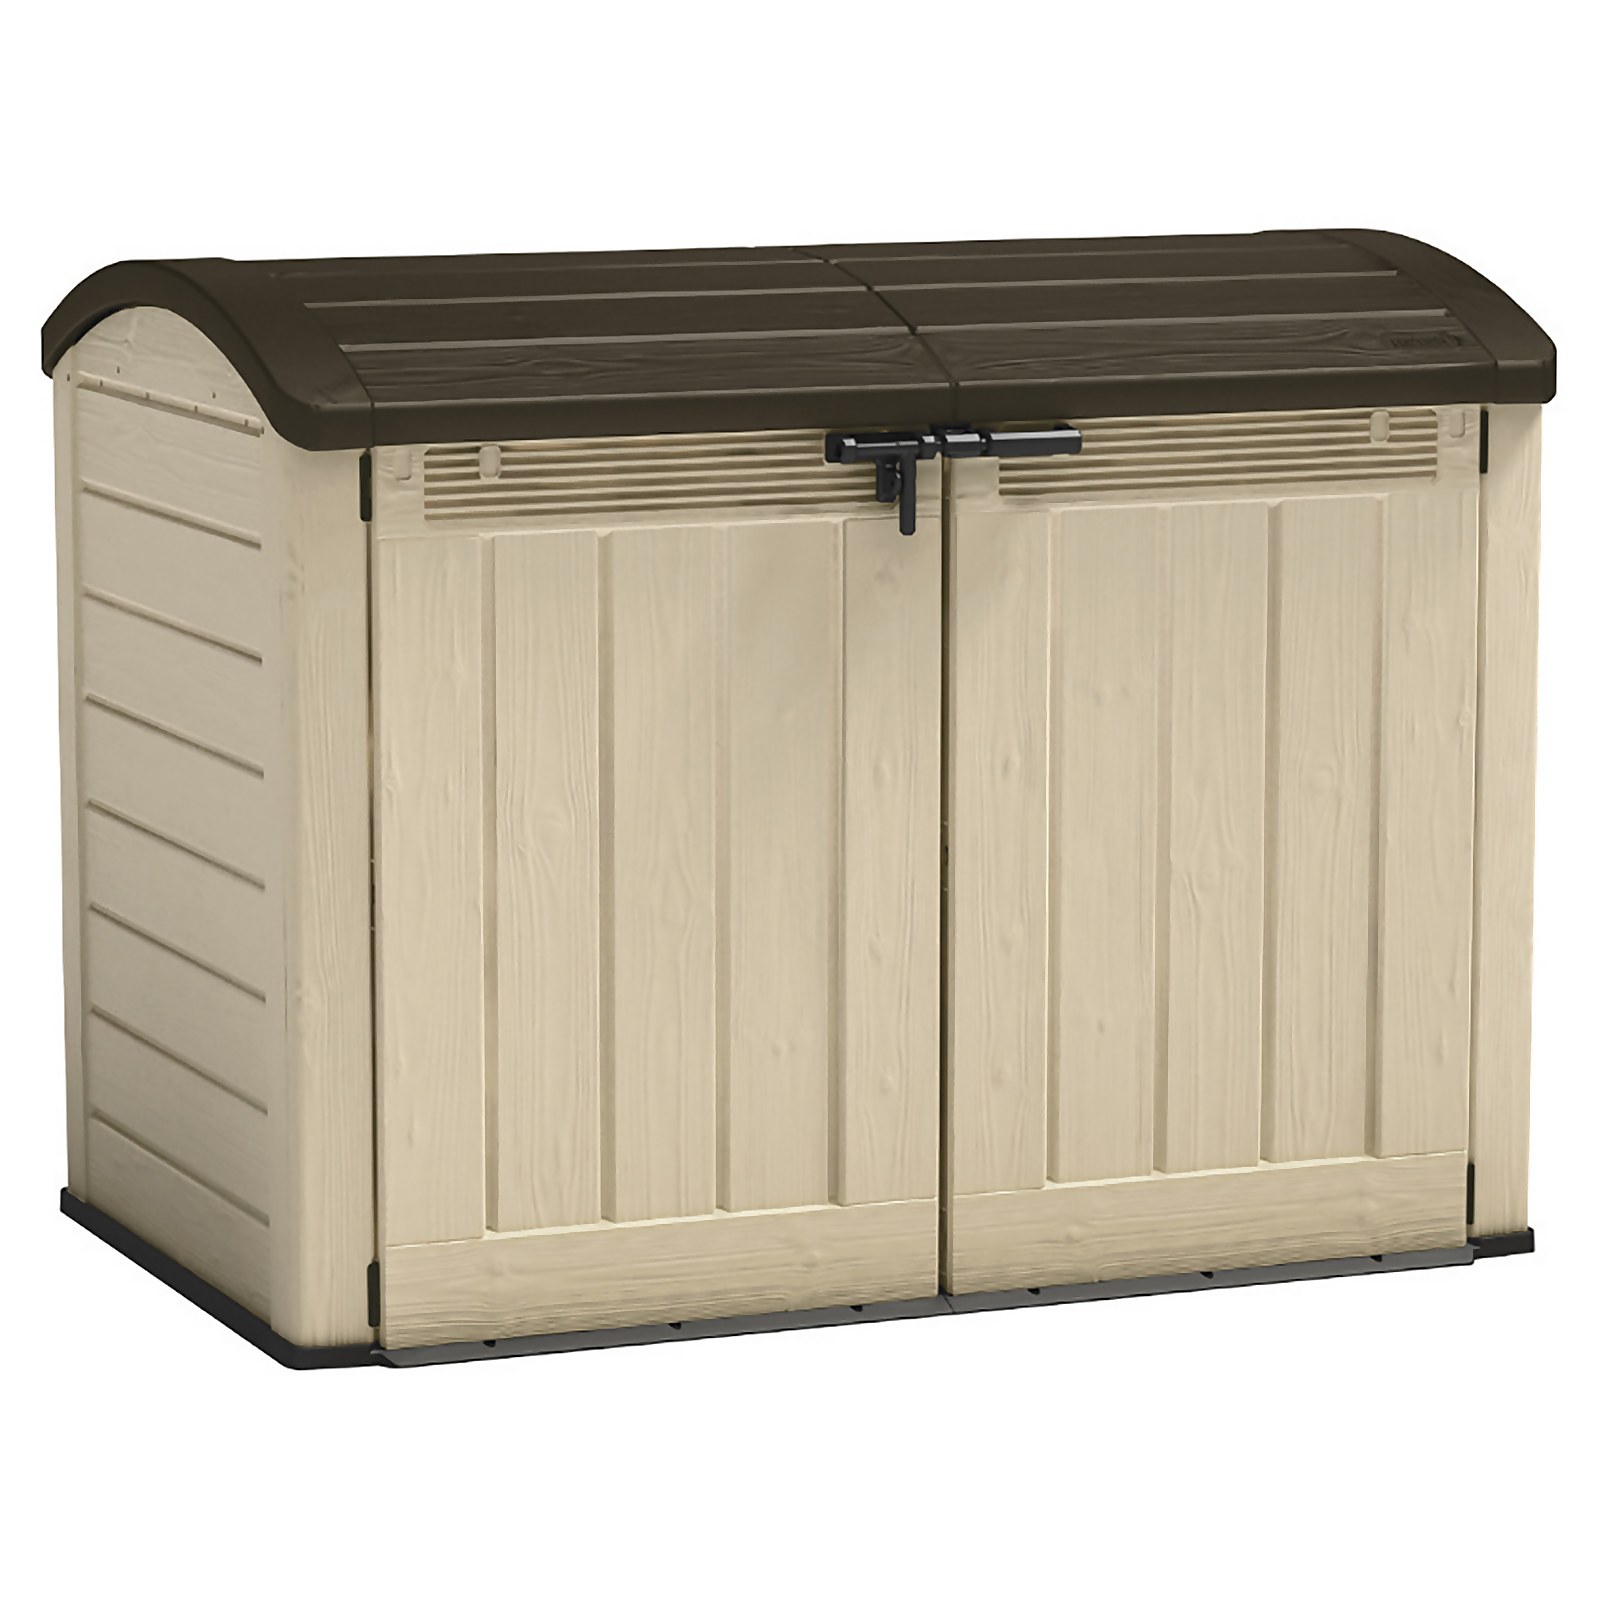 Keter Store it Out Ultra Outdoor Garden Storage Shed 2000L- Beige & Brown